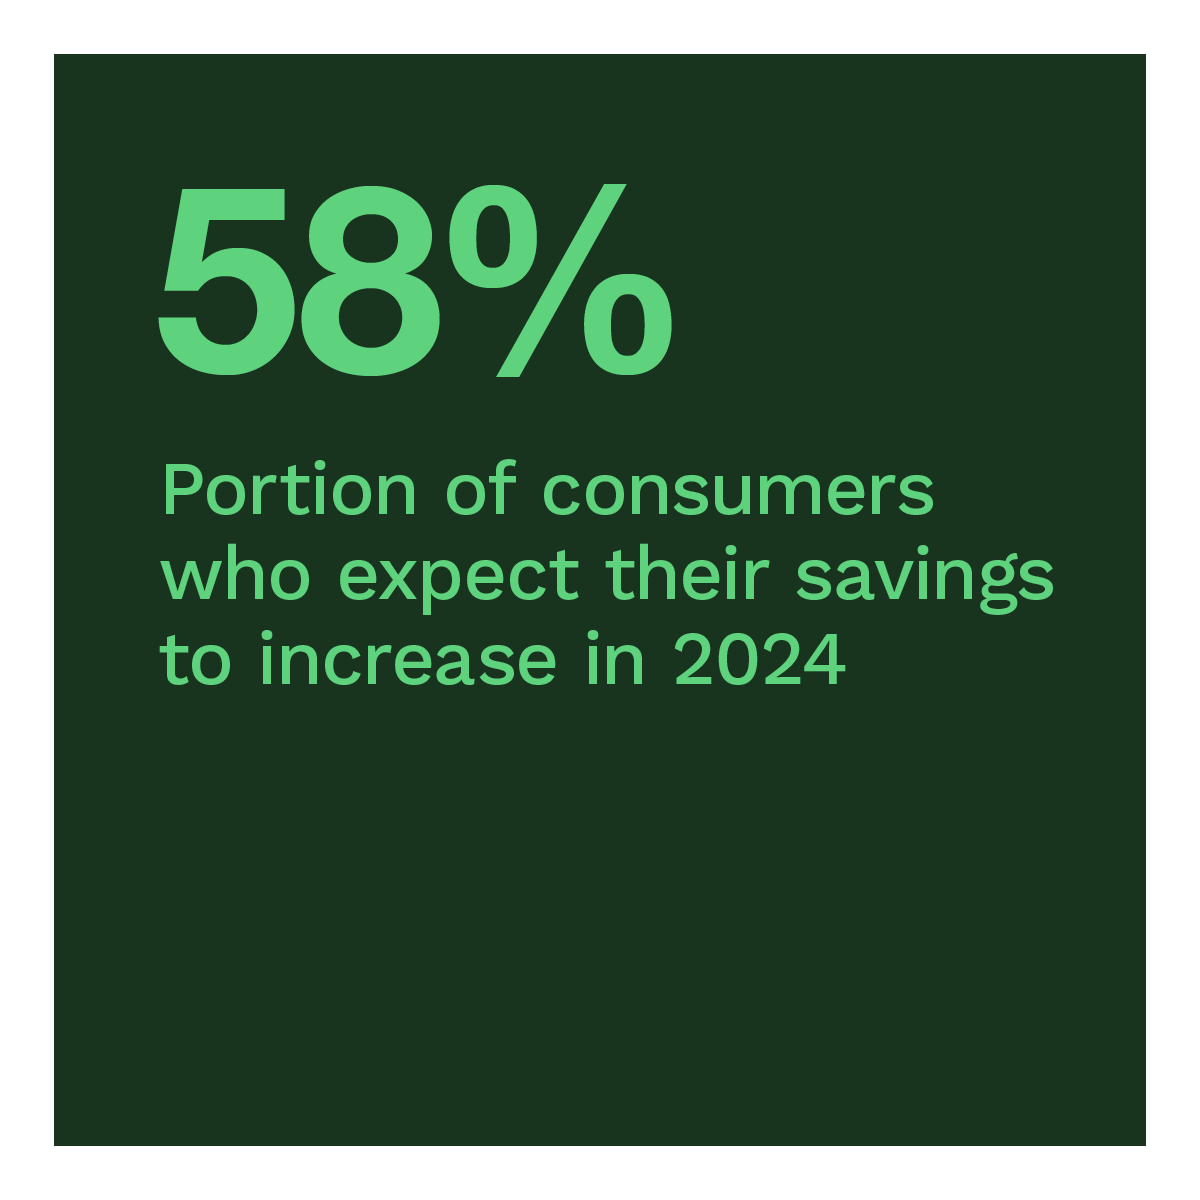 58%: Portion of consumers who expect their savings to increase in 2024